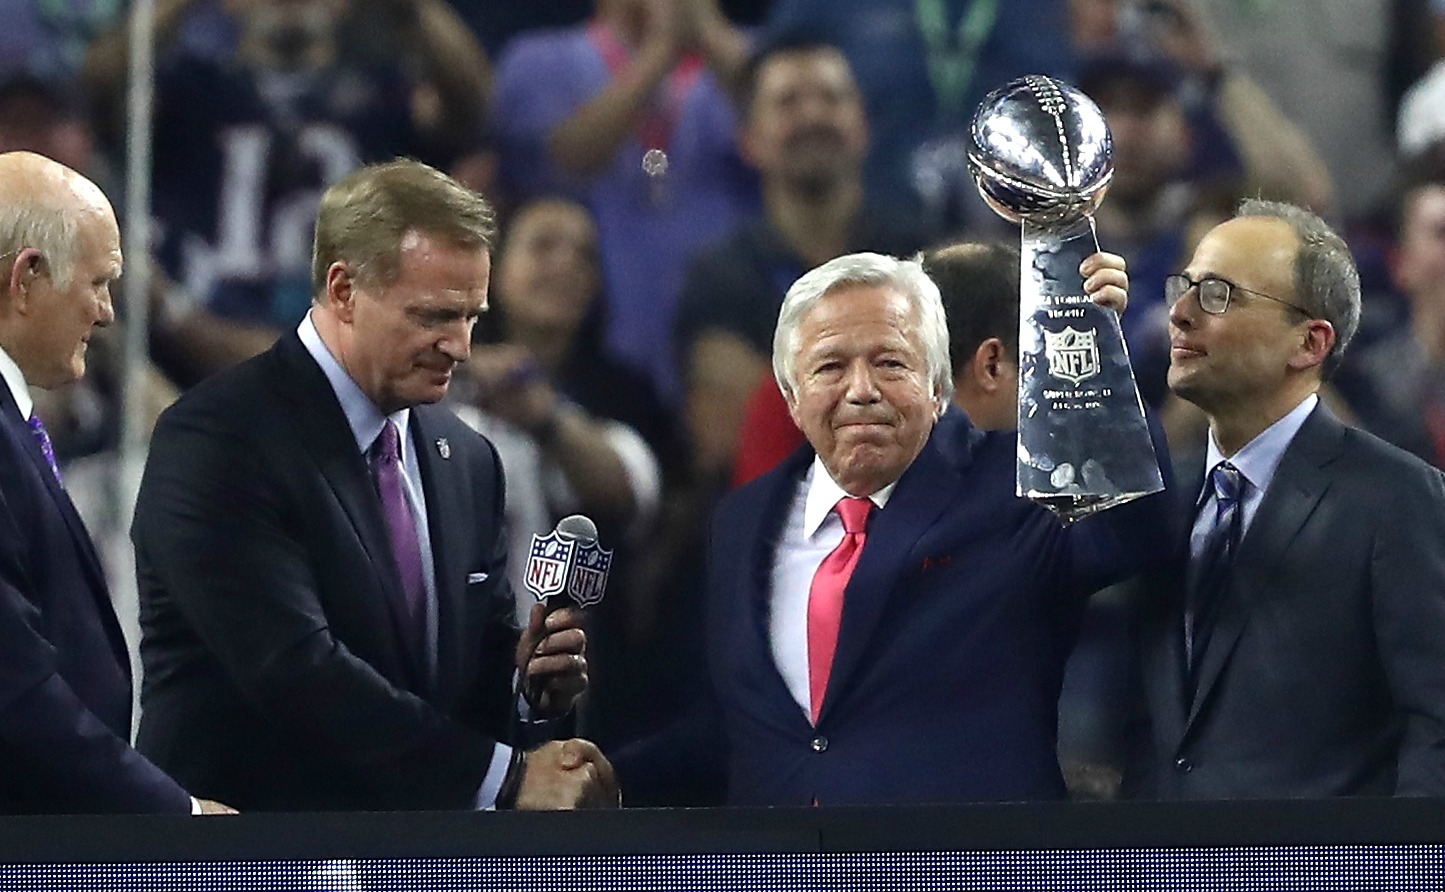 Patriots Fans Boo Roger Goodell During Super Bowl Trophy Presentation – CBS New York1445 x 892